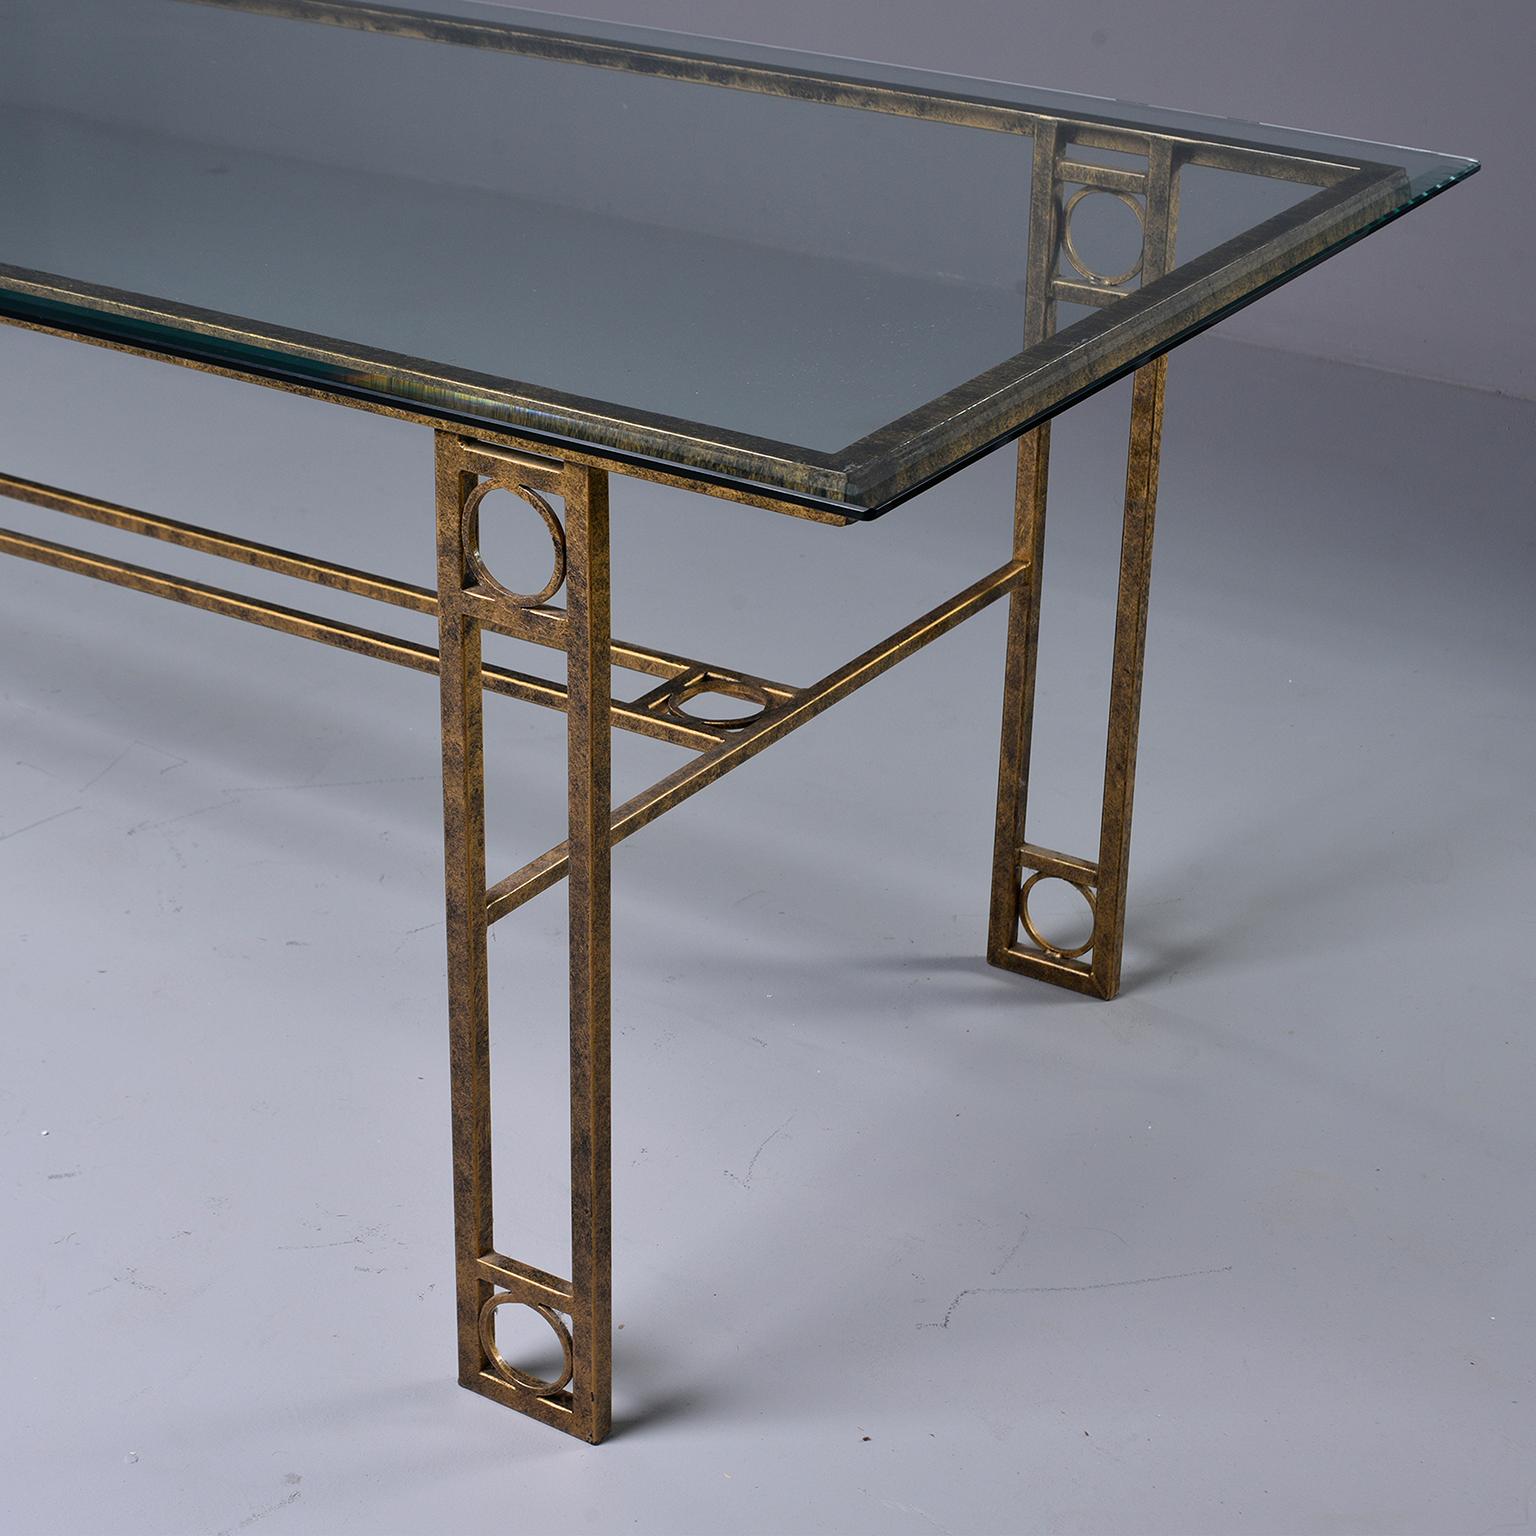 European Midcentury Dining Table with Iron Base and Glass Top